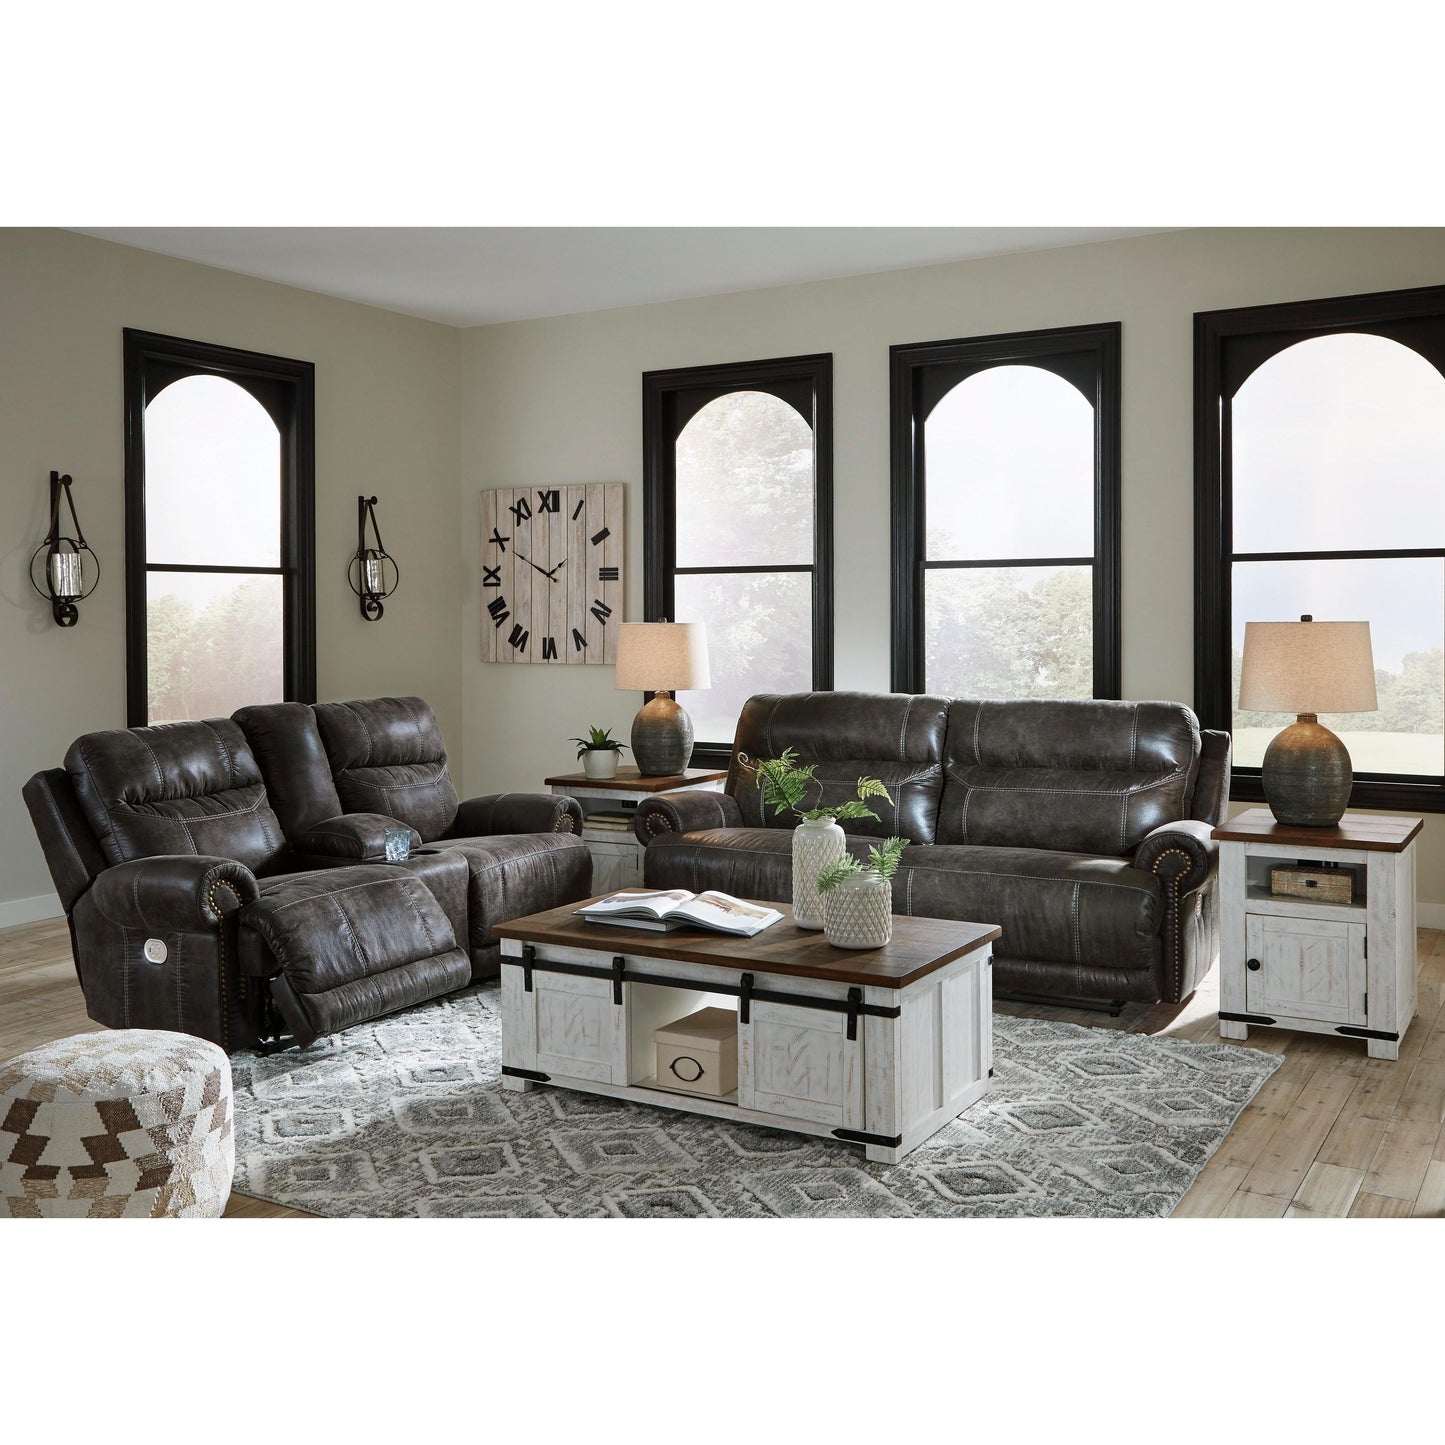 Signature Design by Ashley Grearview 65005U1 2 pc Power Reclining Living Room Set IMAGE 1